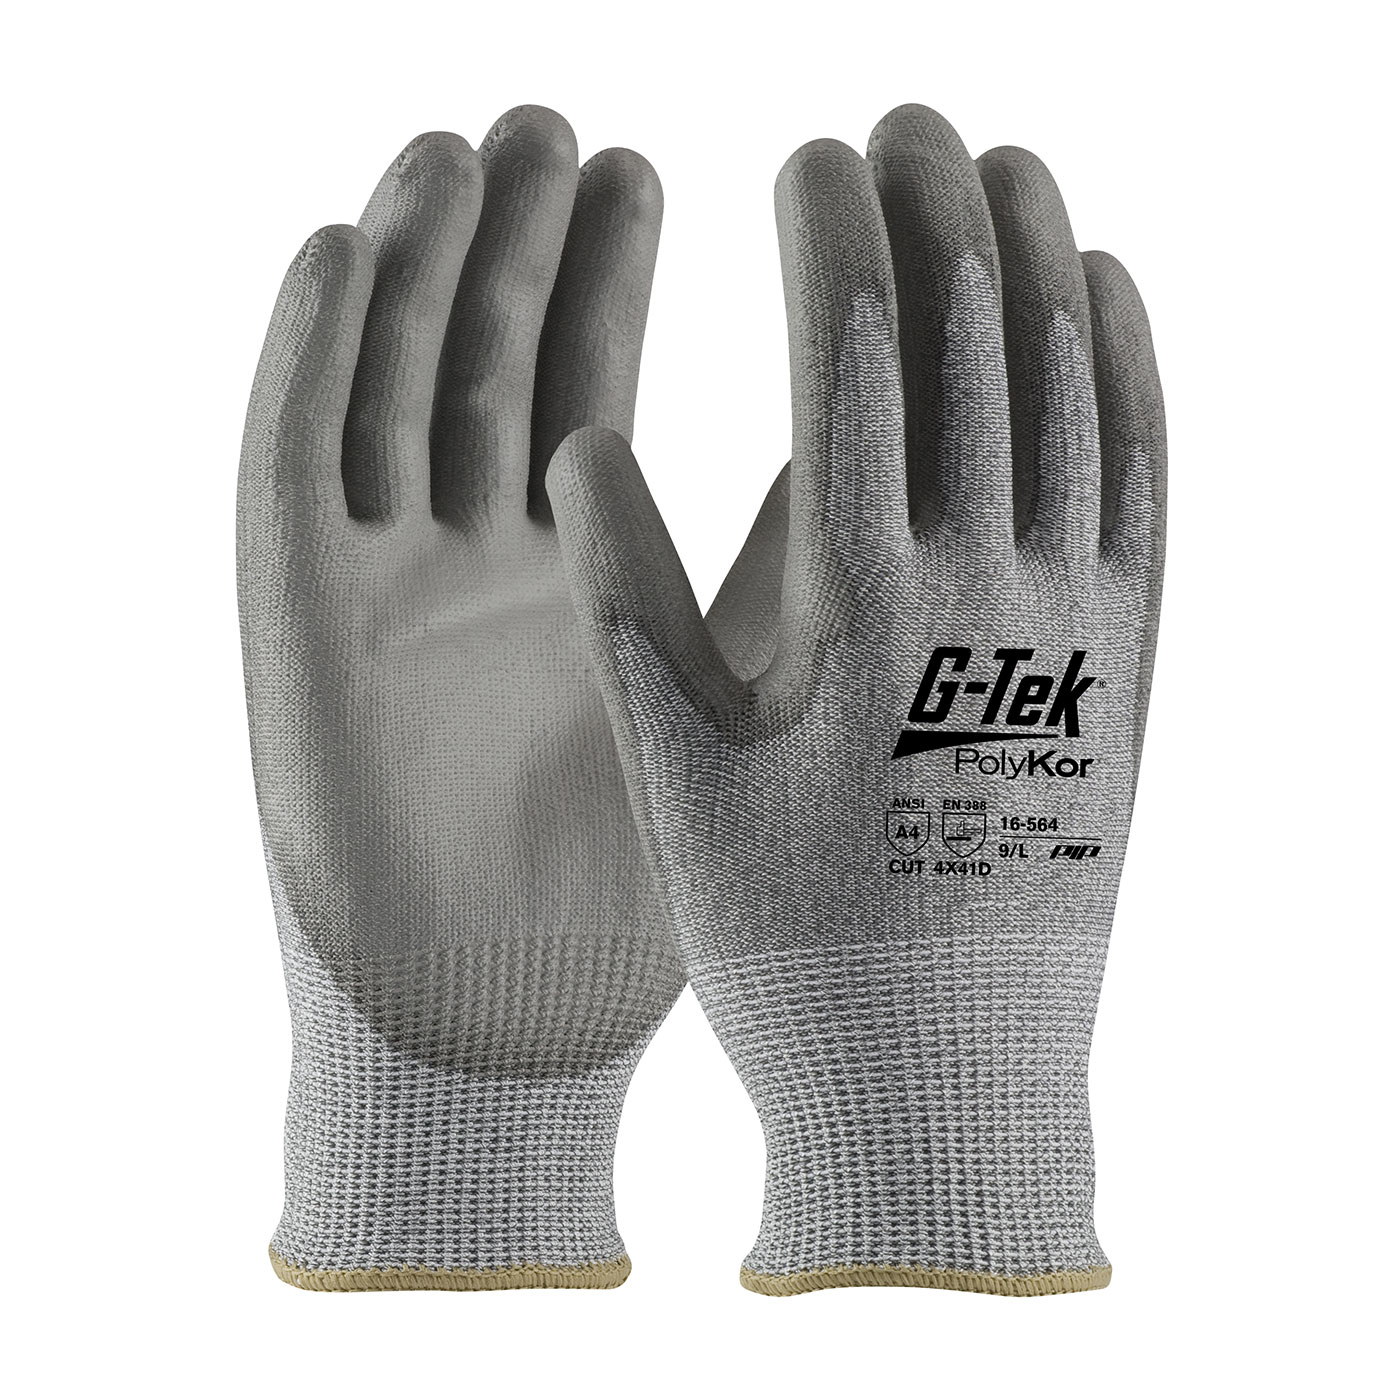 PIP 16-564/L G-Tek PolyKor Industry Grade Seamless Knit PolyKor Blended Glove with Polyurethane Coated Smooth Grip on Palm & Fingers - Large PID-16564L